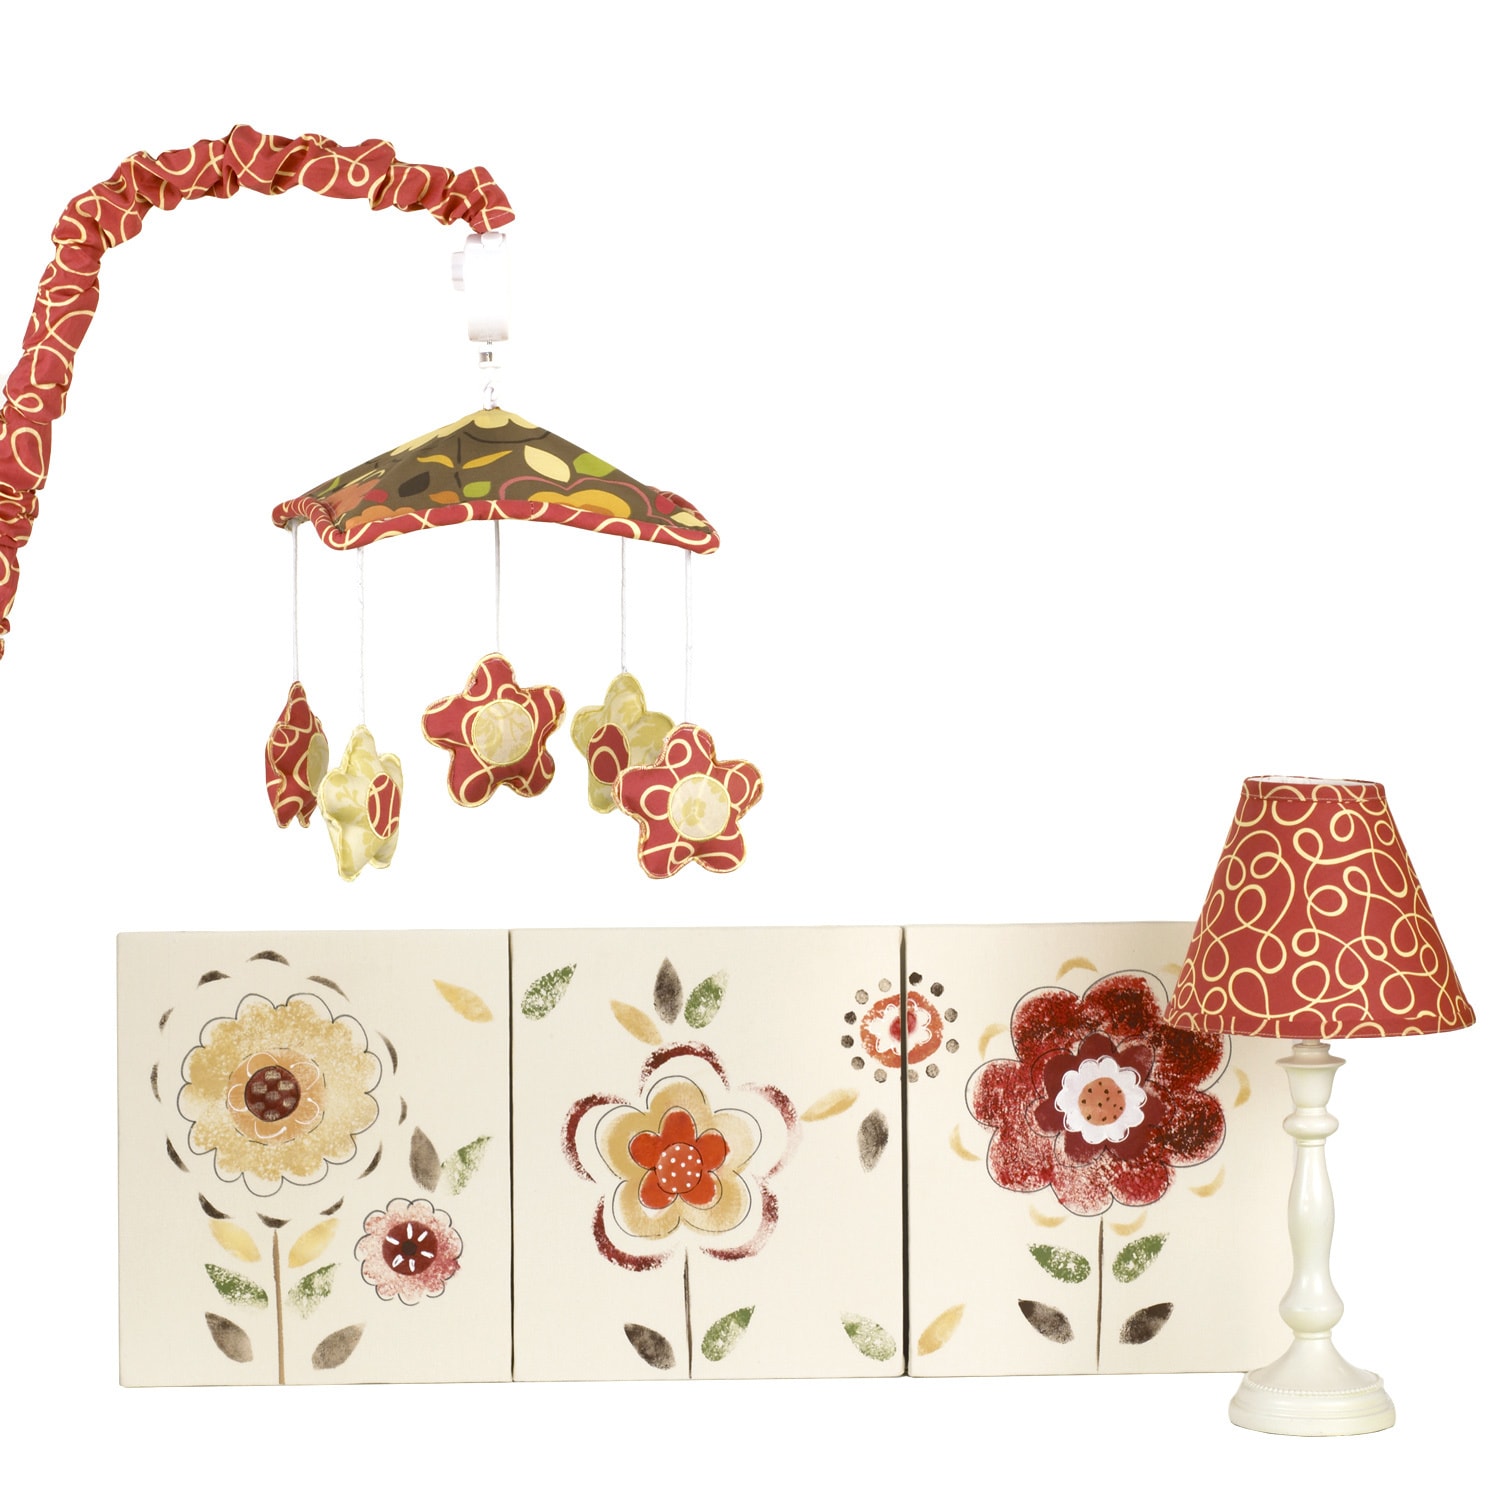 Cotton Tale Peggy Sue Decor Kit (Red/yellow/brown/greenPattern Peggy SueSet includes Wall art, mobile, standard lampHand painted on natural canvasLamp requires one (1) 60 watt bulb maximum (not included) Wind up mobile plays Brahms LullabyMaterials Pol